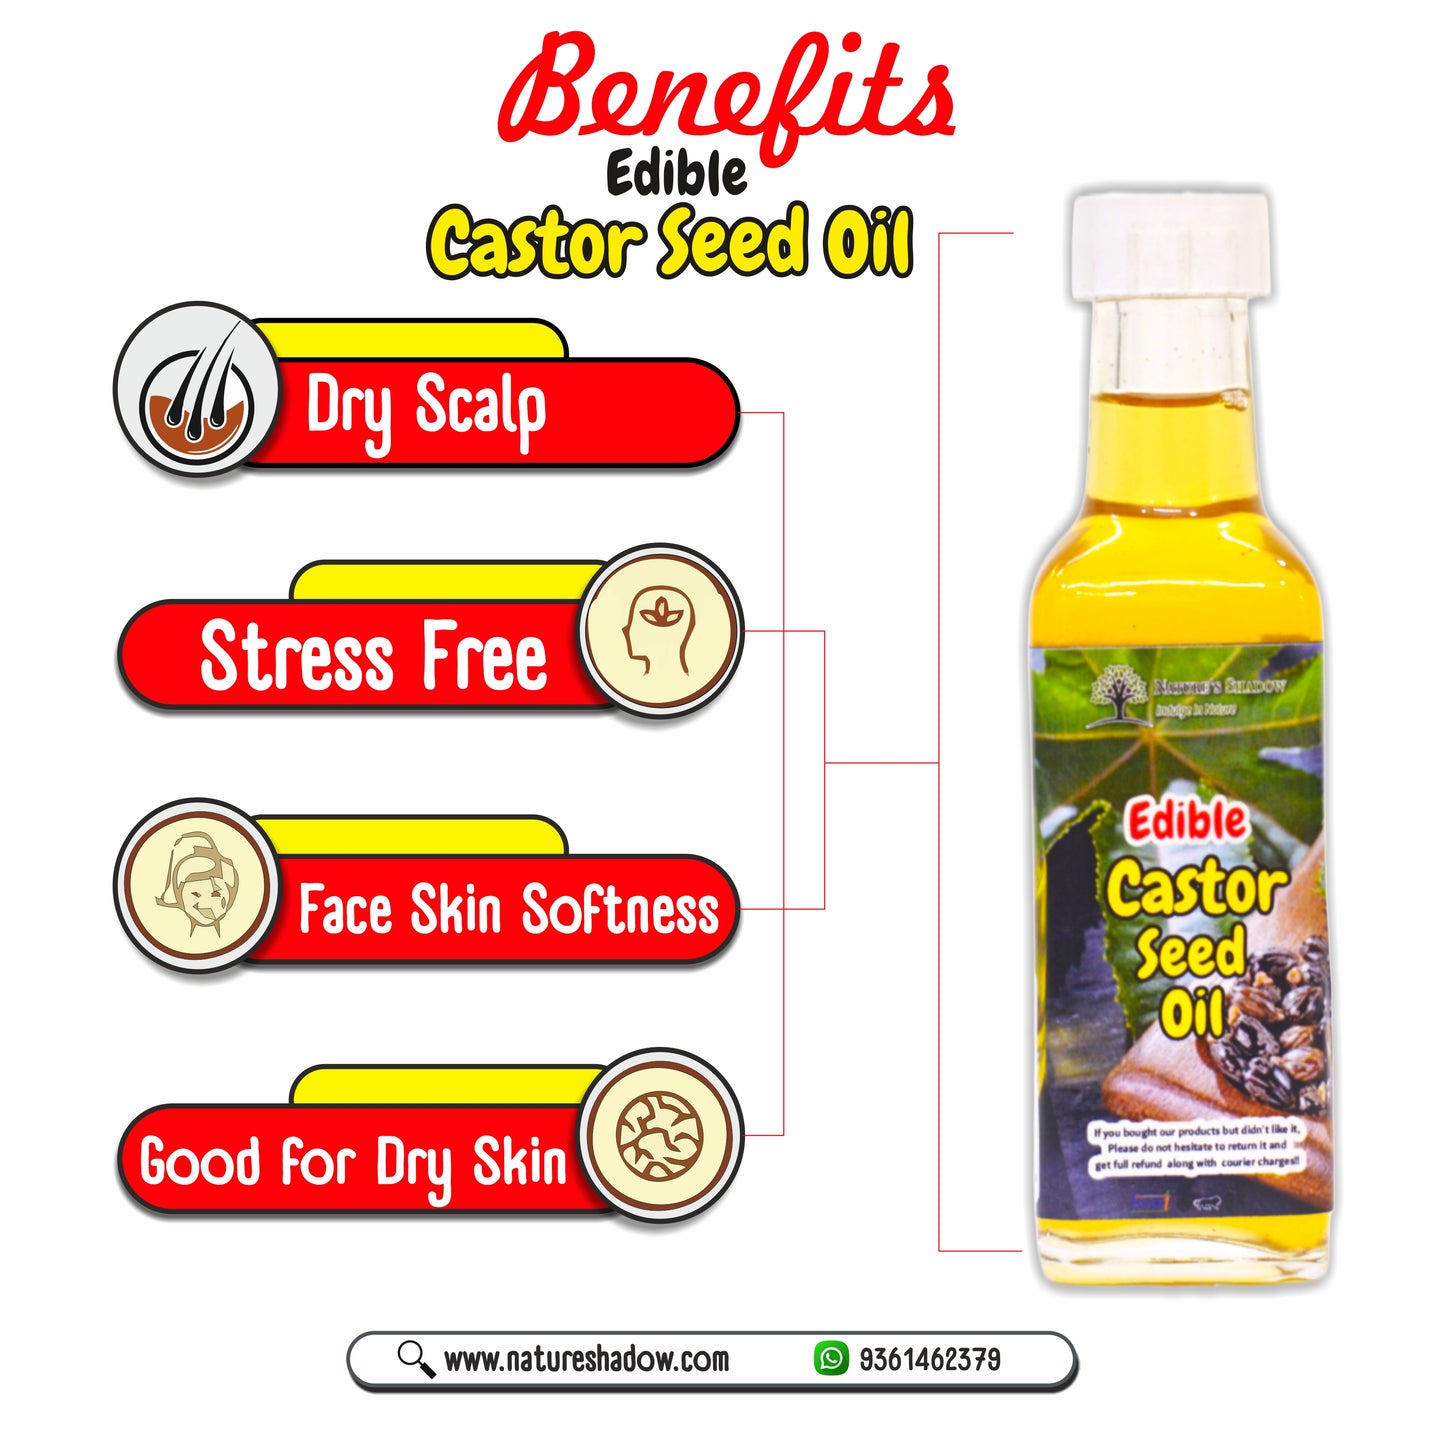 Cold Pressed Edible Castor Oil for Cooking, Internal and External Purposes (250 ML)